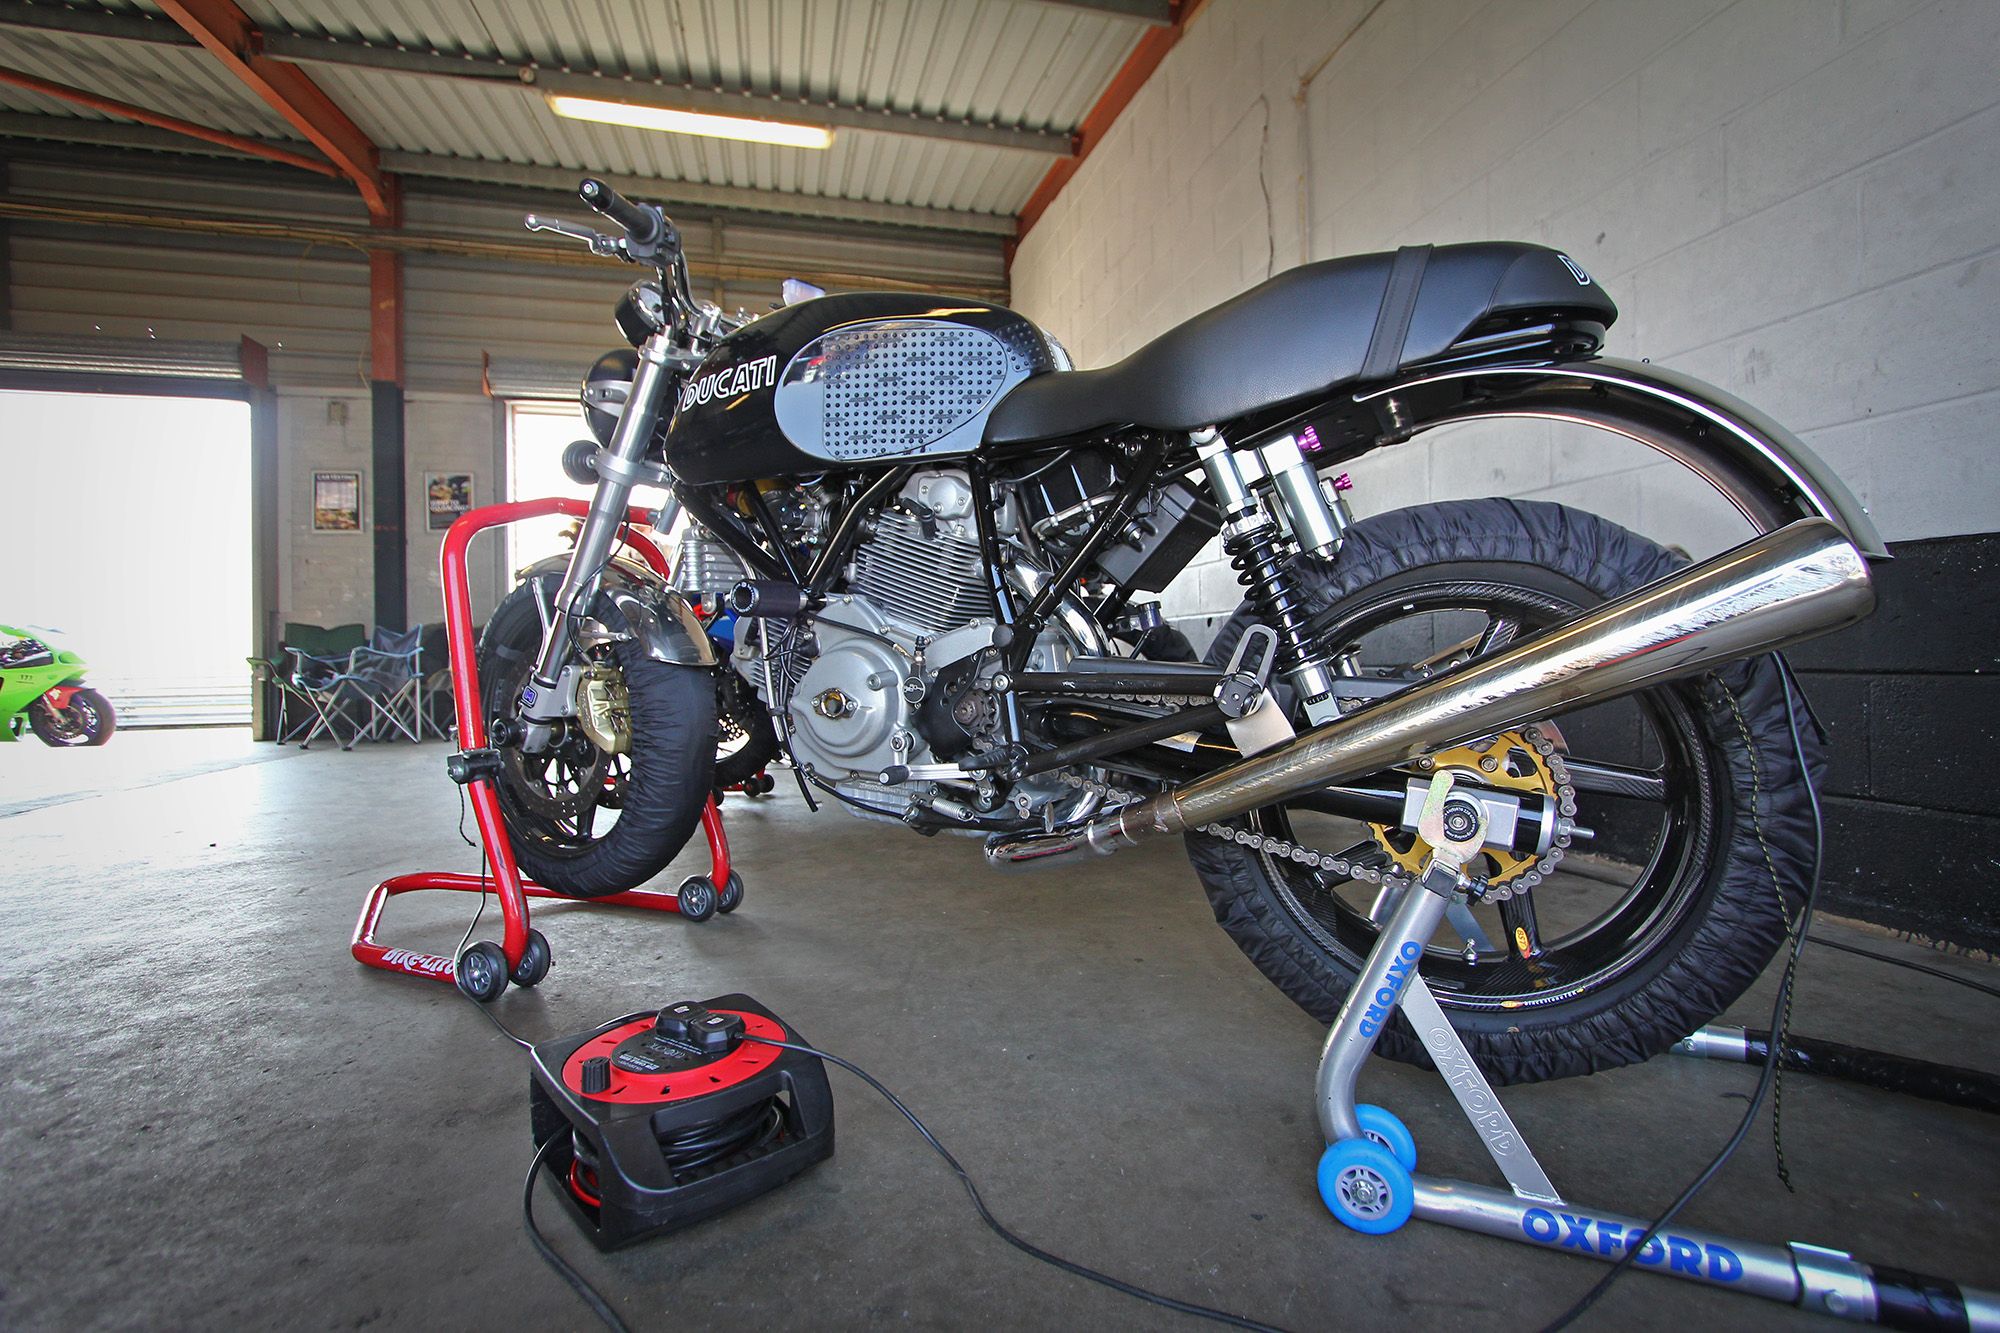 Ducati motorbike in a garage at a trackday